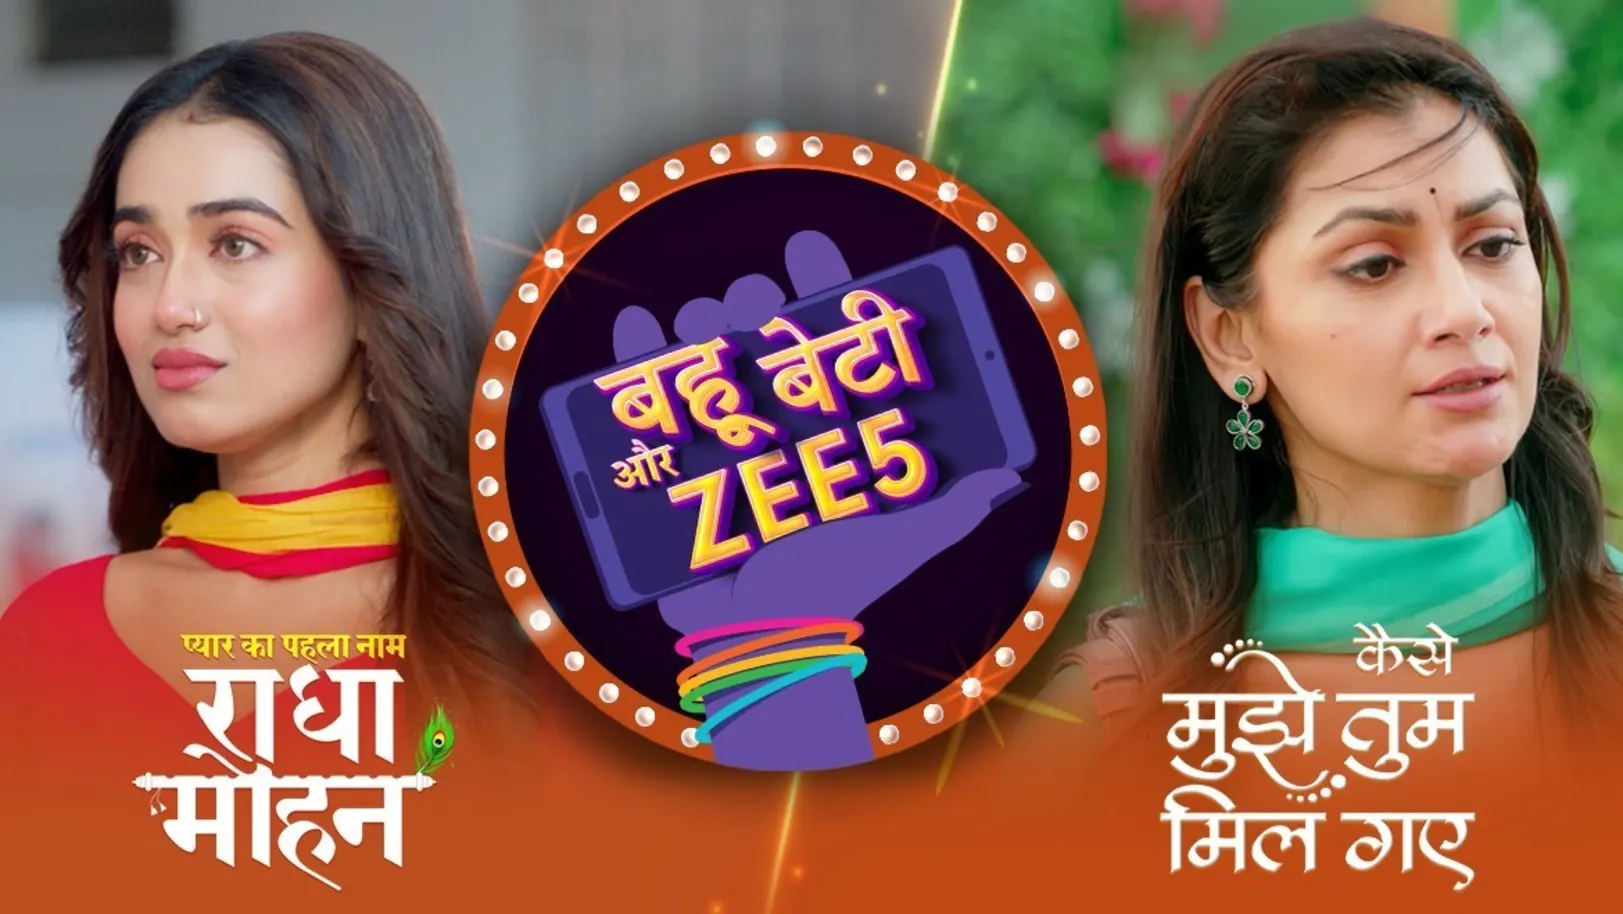 The Narration of Interesting Twists in the Shows | Behind the Scenes | Bahu Beti Aur ZEE5 Episode 8